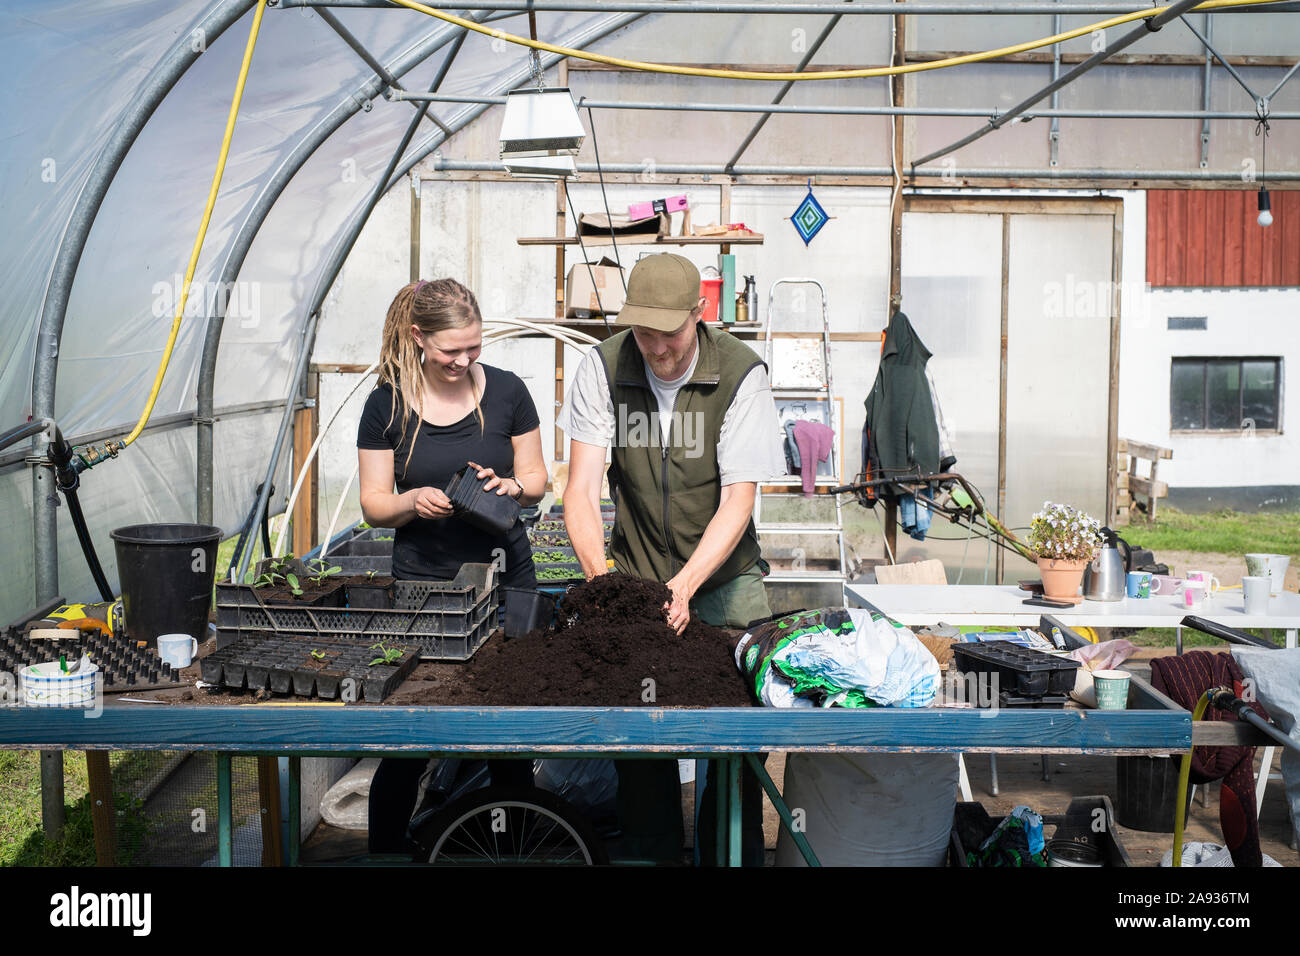 Man and woman in greenhouse Stock Photo